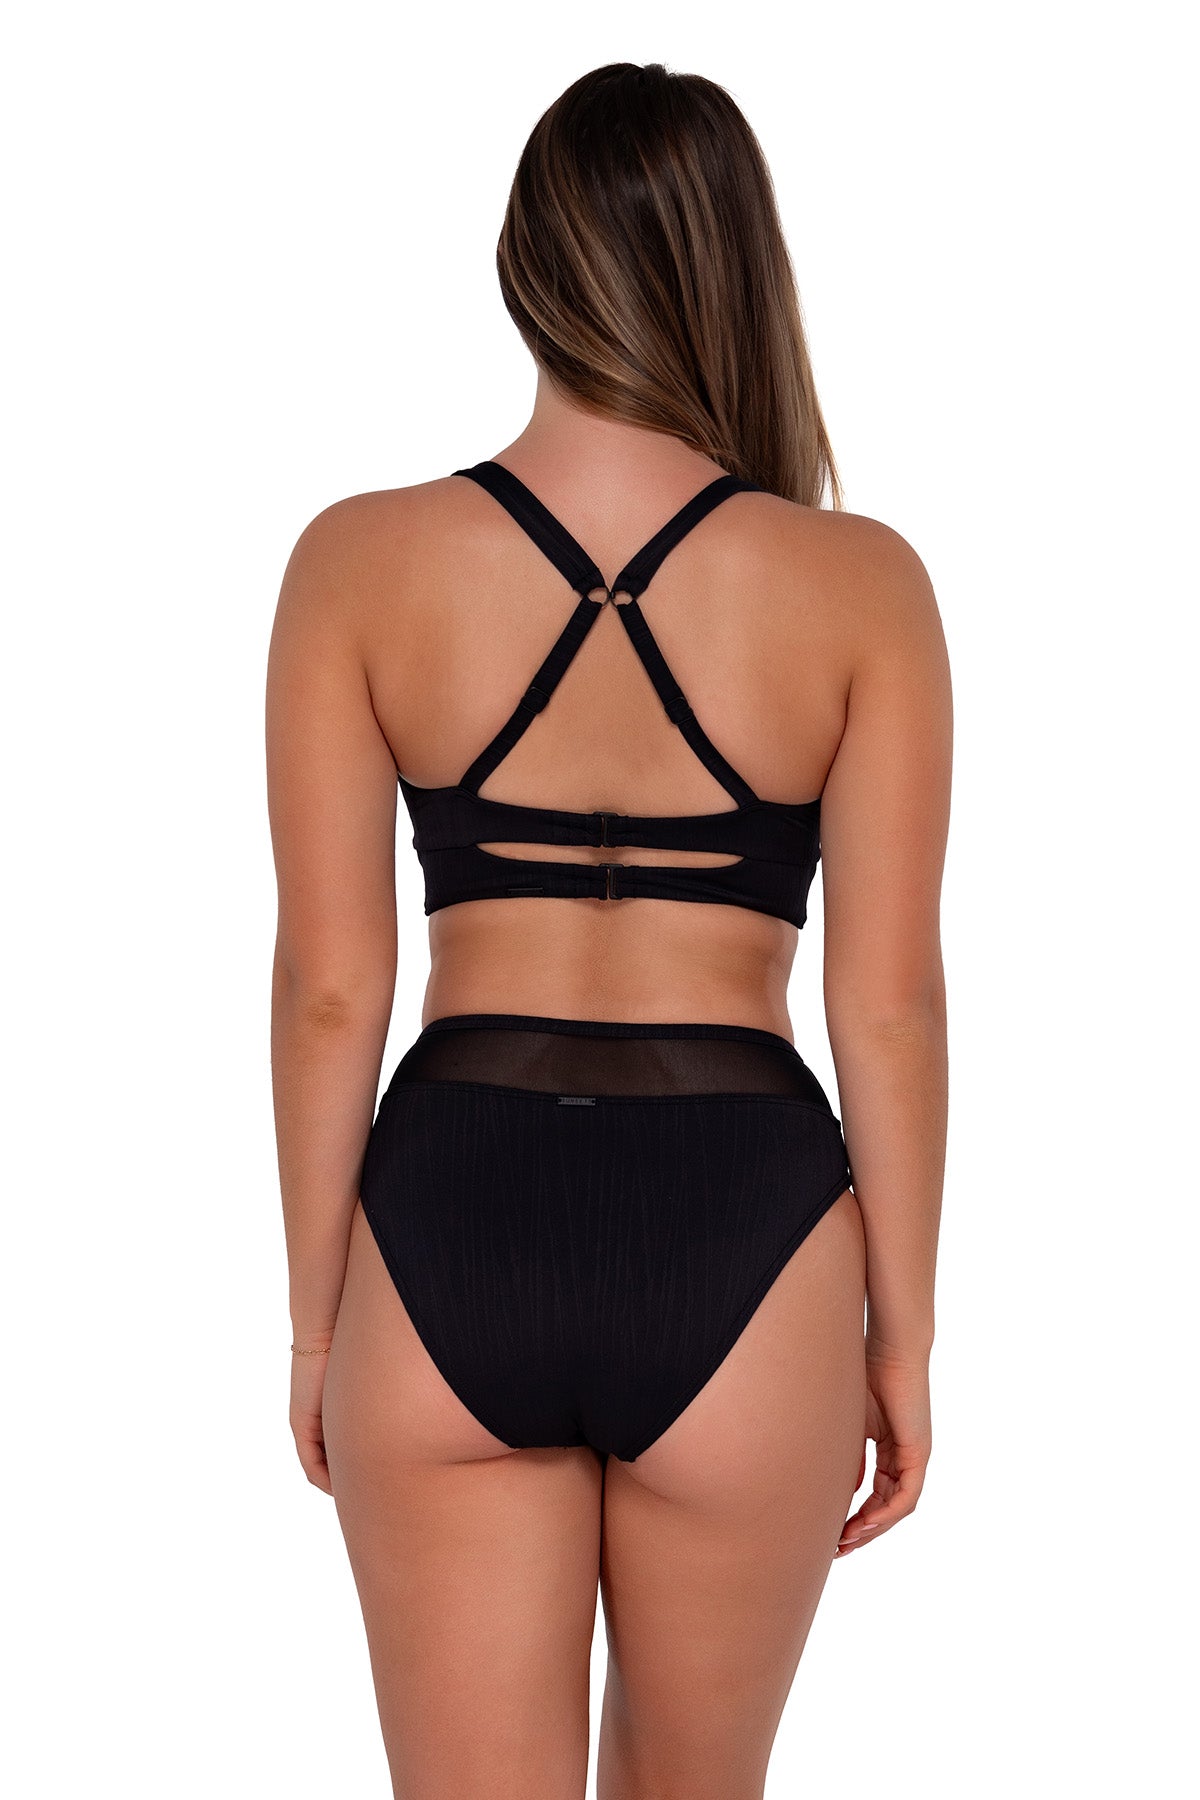 Back pose #1 of Taylor wearing Sunsets Black Seagrass Texture Danica Top showing crossback straps paired with Annie High Waist bikini bottom